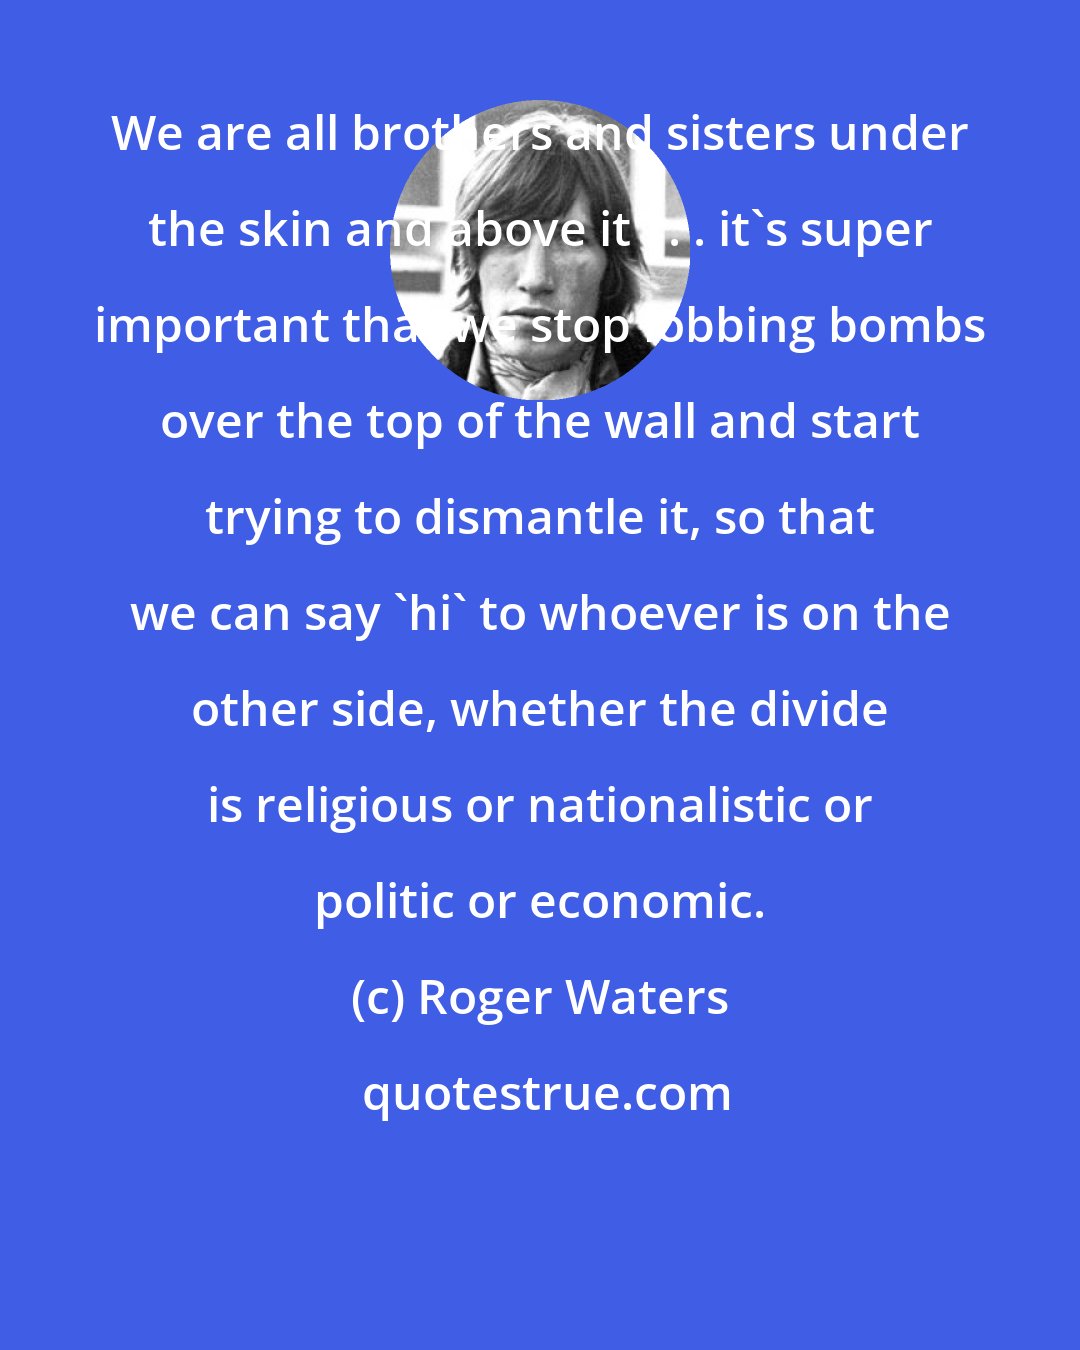 Roger Waters: We are all brothers and sisters under the skin and above it . . . it's super important that we stop lobbing bombs over the top of the wall and start trying to dismantle it, so that we can say 'hi' to whoever is on the other side, whether the divide is religious or nationalistic or politic or economic.